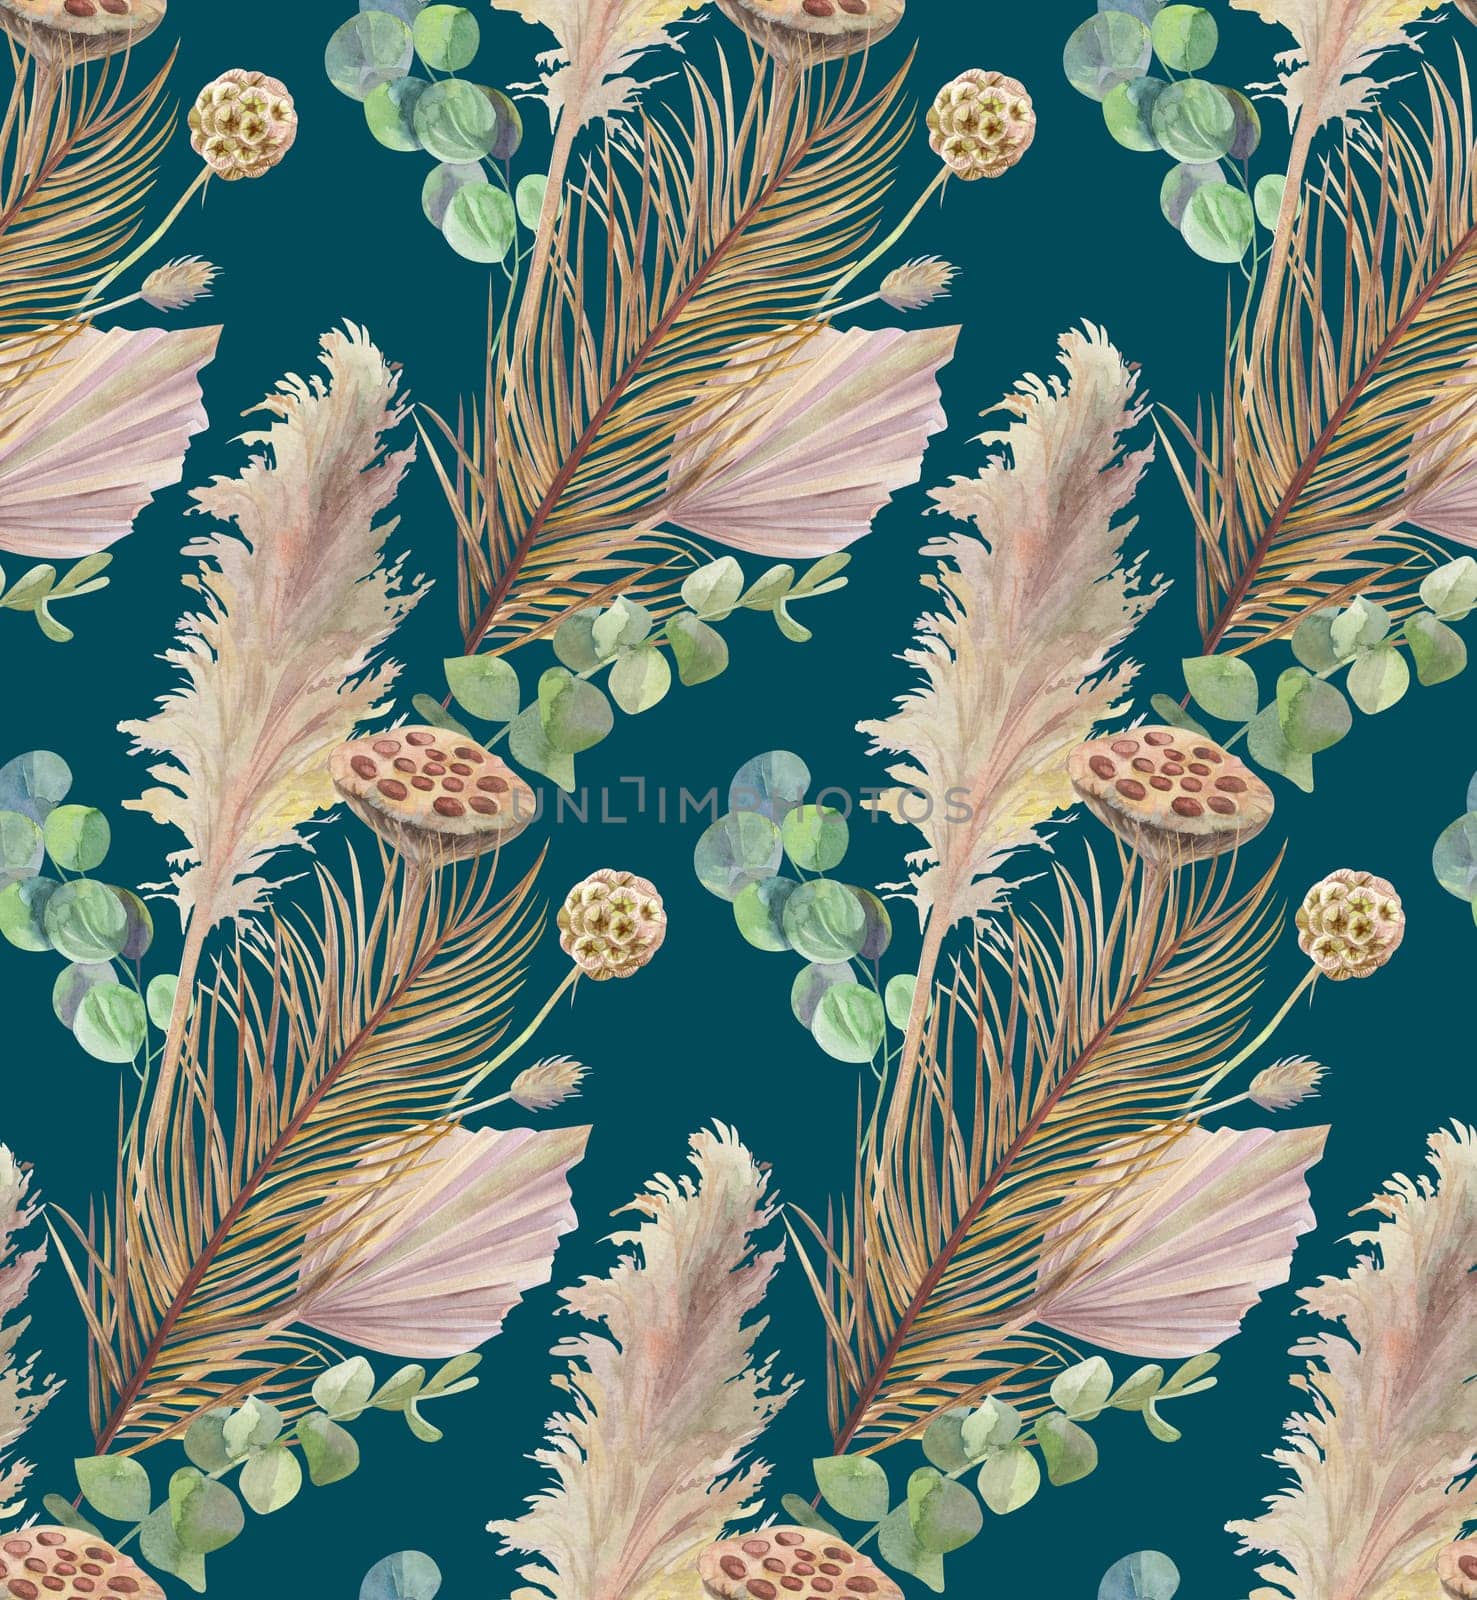 watercolor seamless pattern with dried flowers and dry palm leaves on dark green background for textiles and surface design